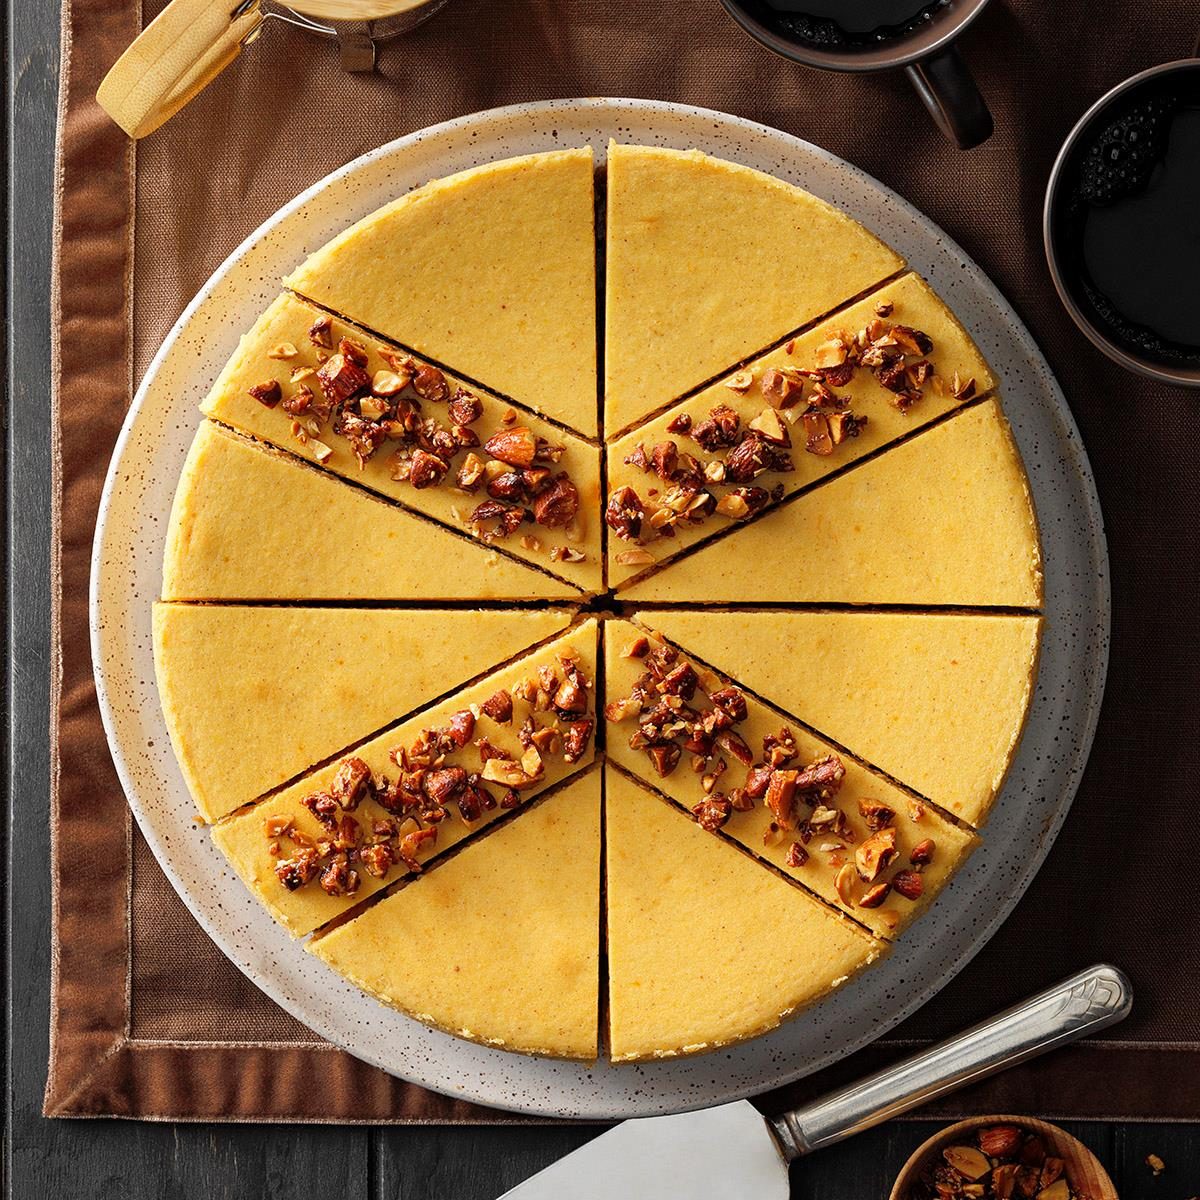 White Chocolate Pumpkin Cheesecake With Almond Topping Exps Pcbbz21 38142 B05 04 9b